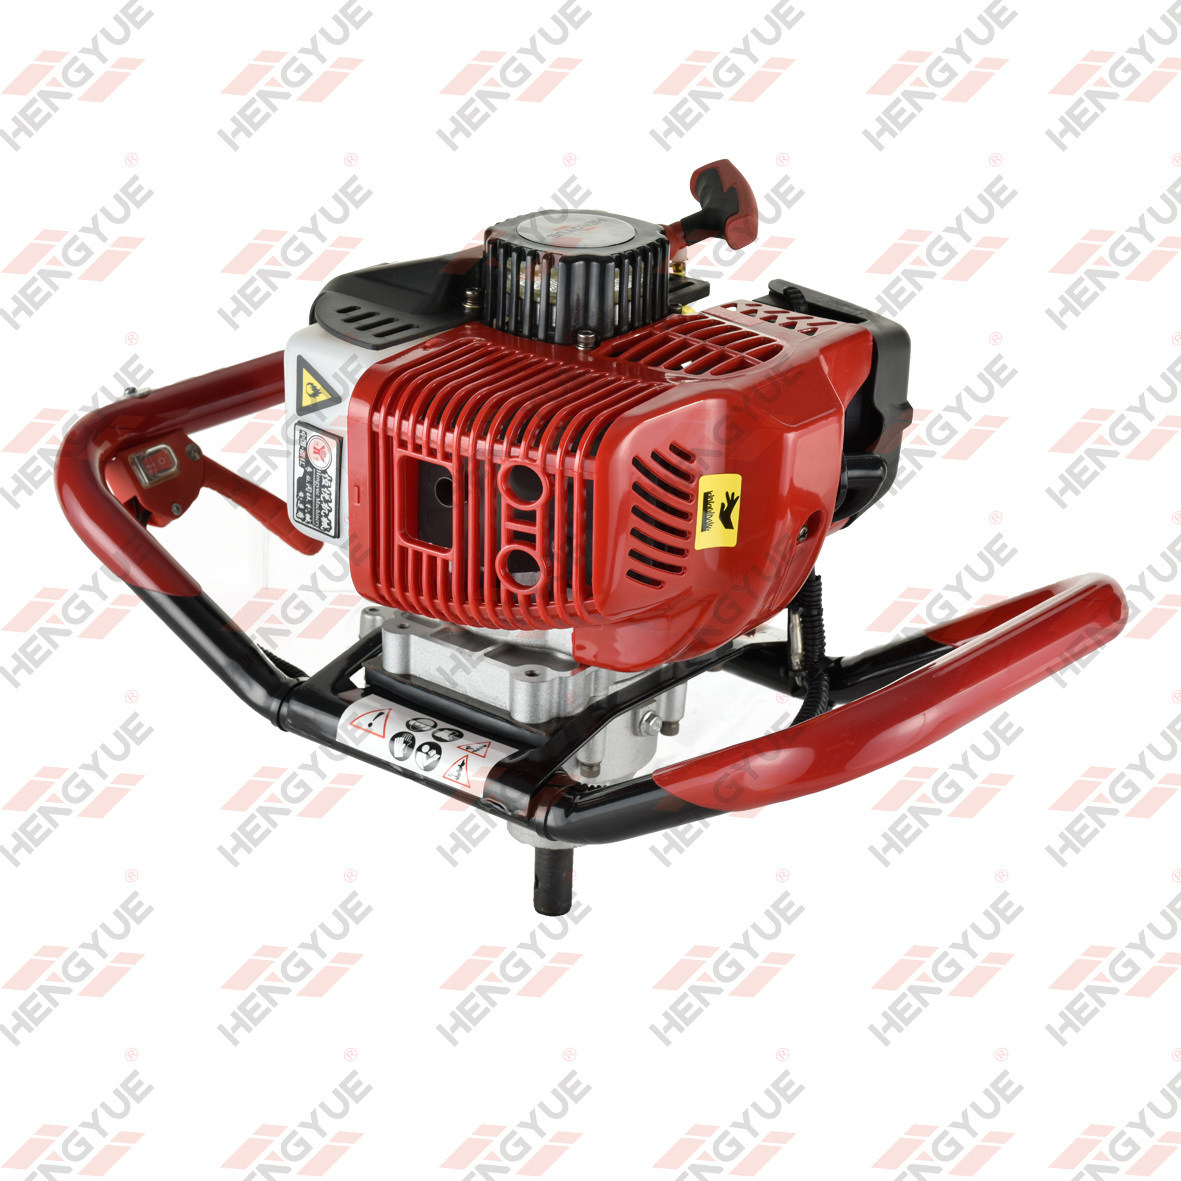 52/58cc Hand Held Earth Auger Earth Auger Drilling Machine